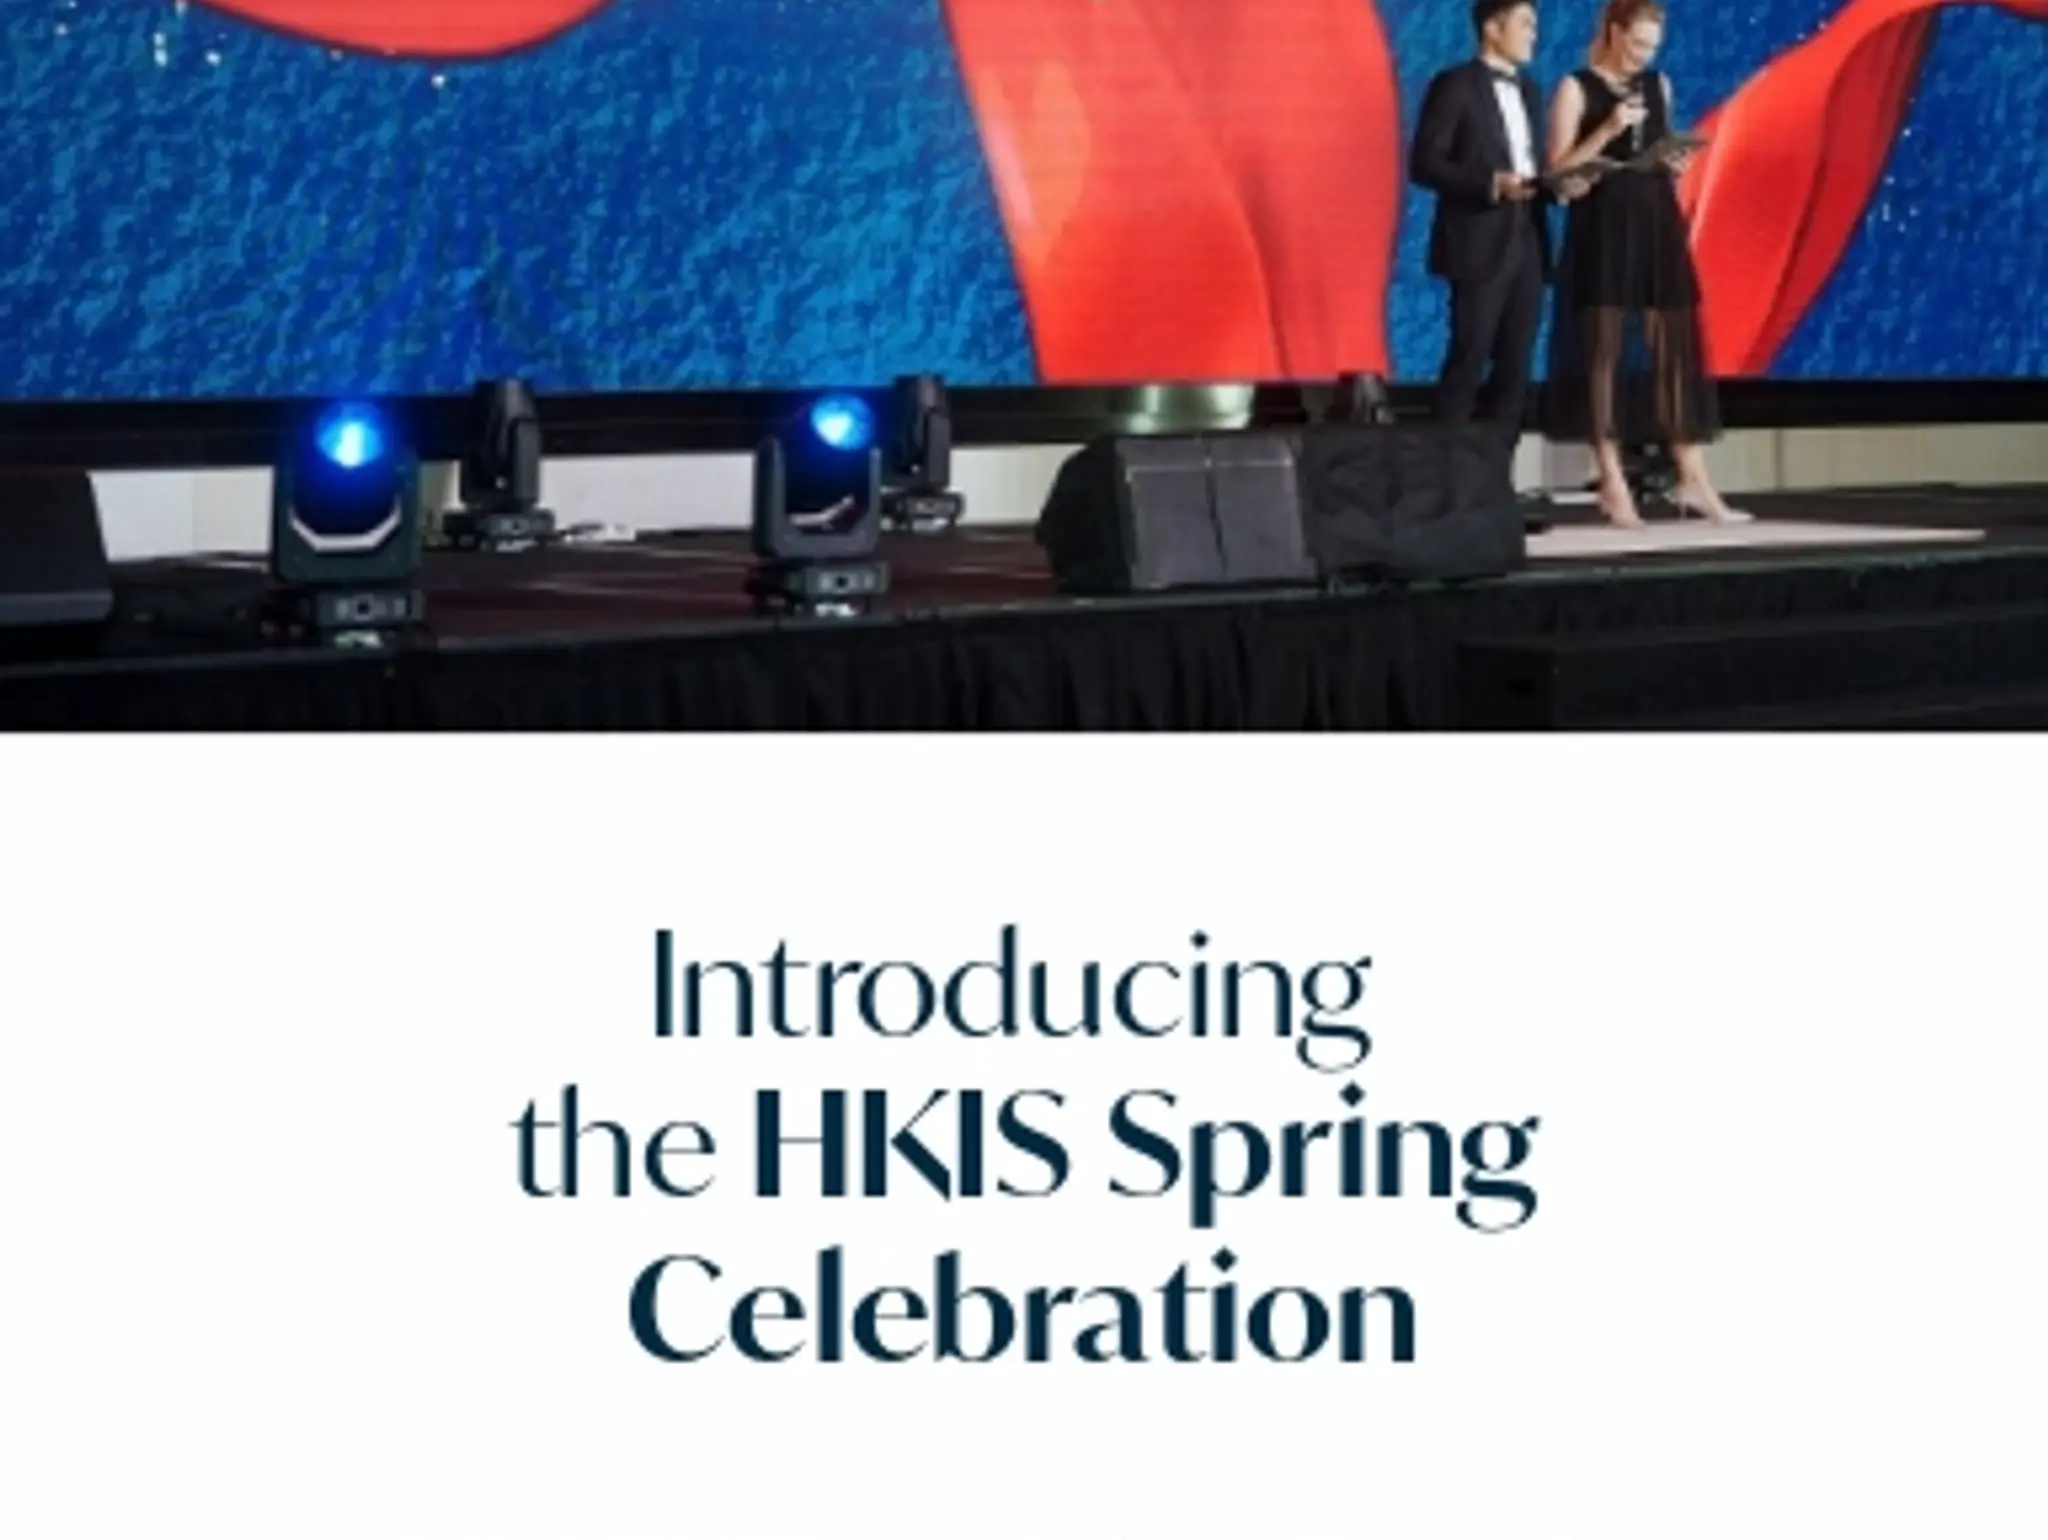 Introducing the HKIS Spring Celebration